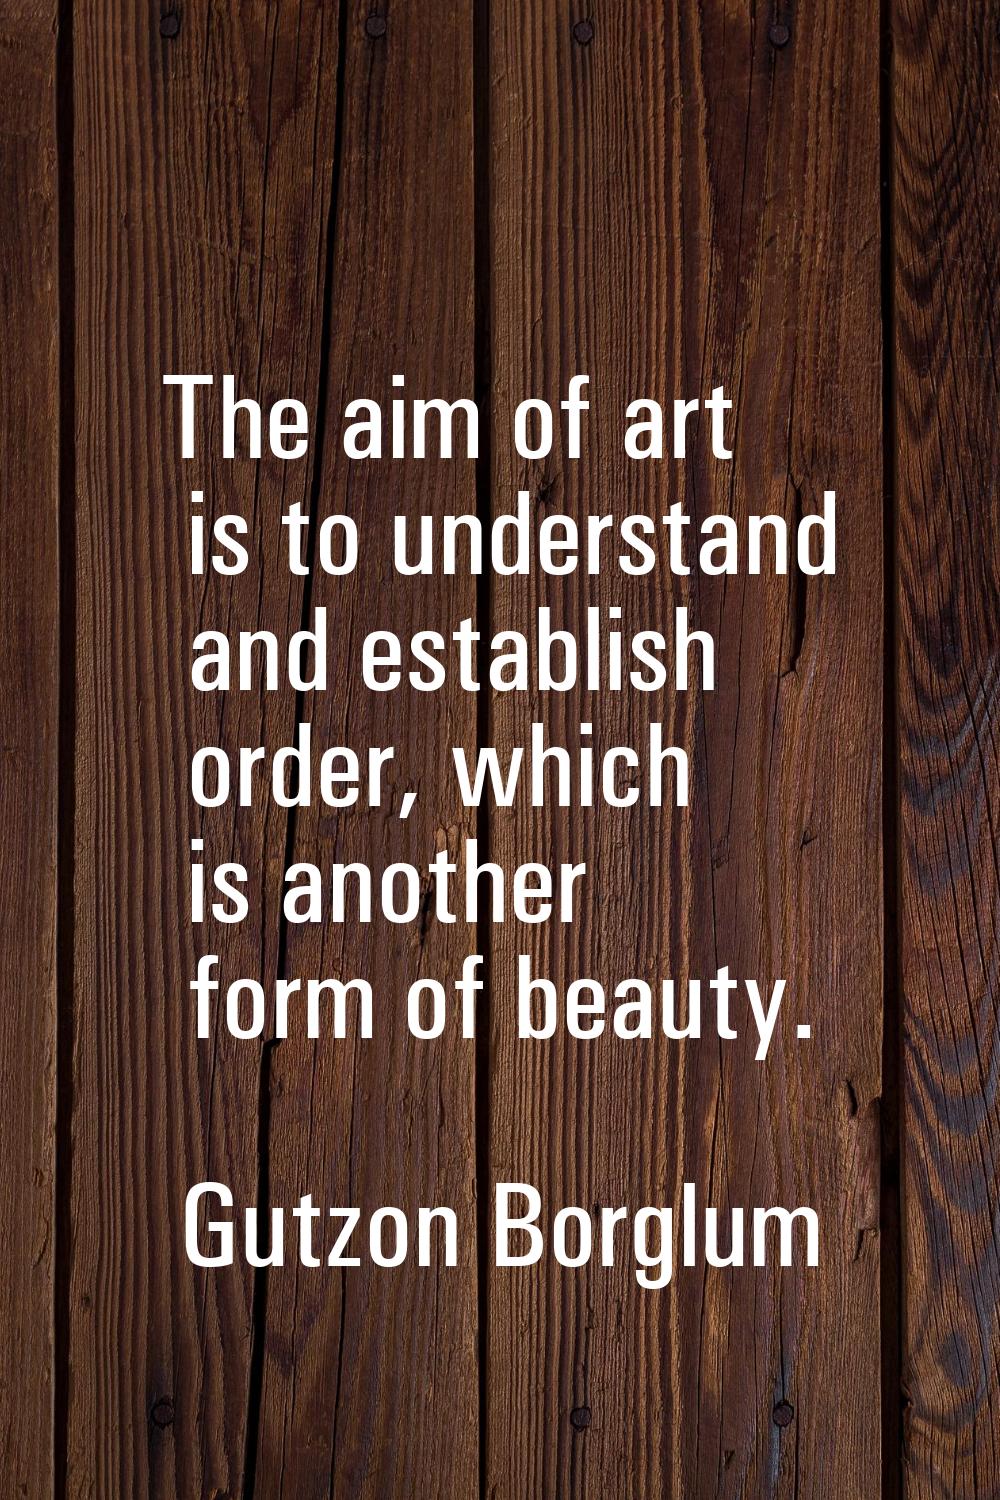 The aim of art is to understand and establish order, which is another form of beauty.